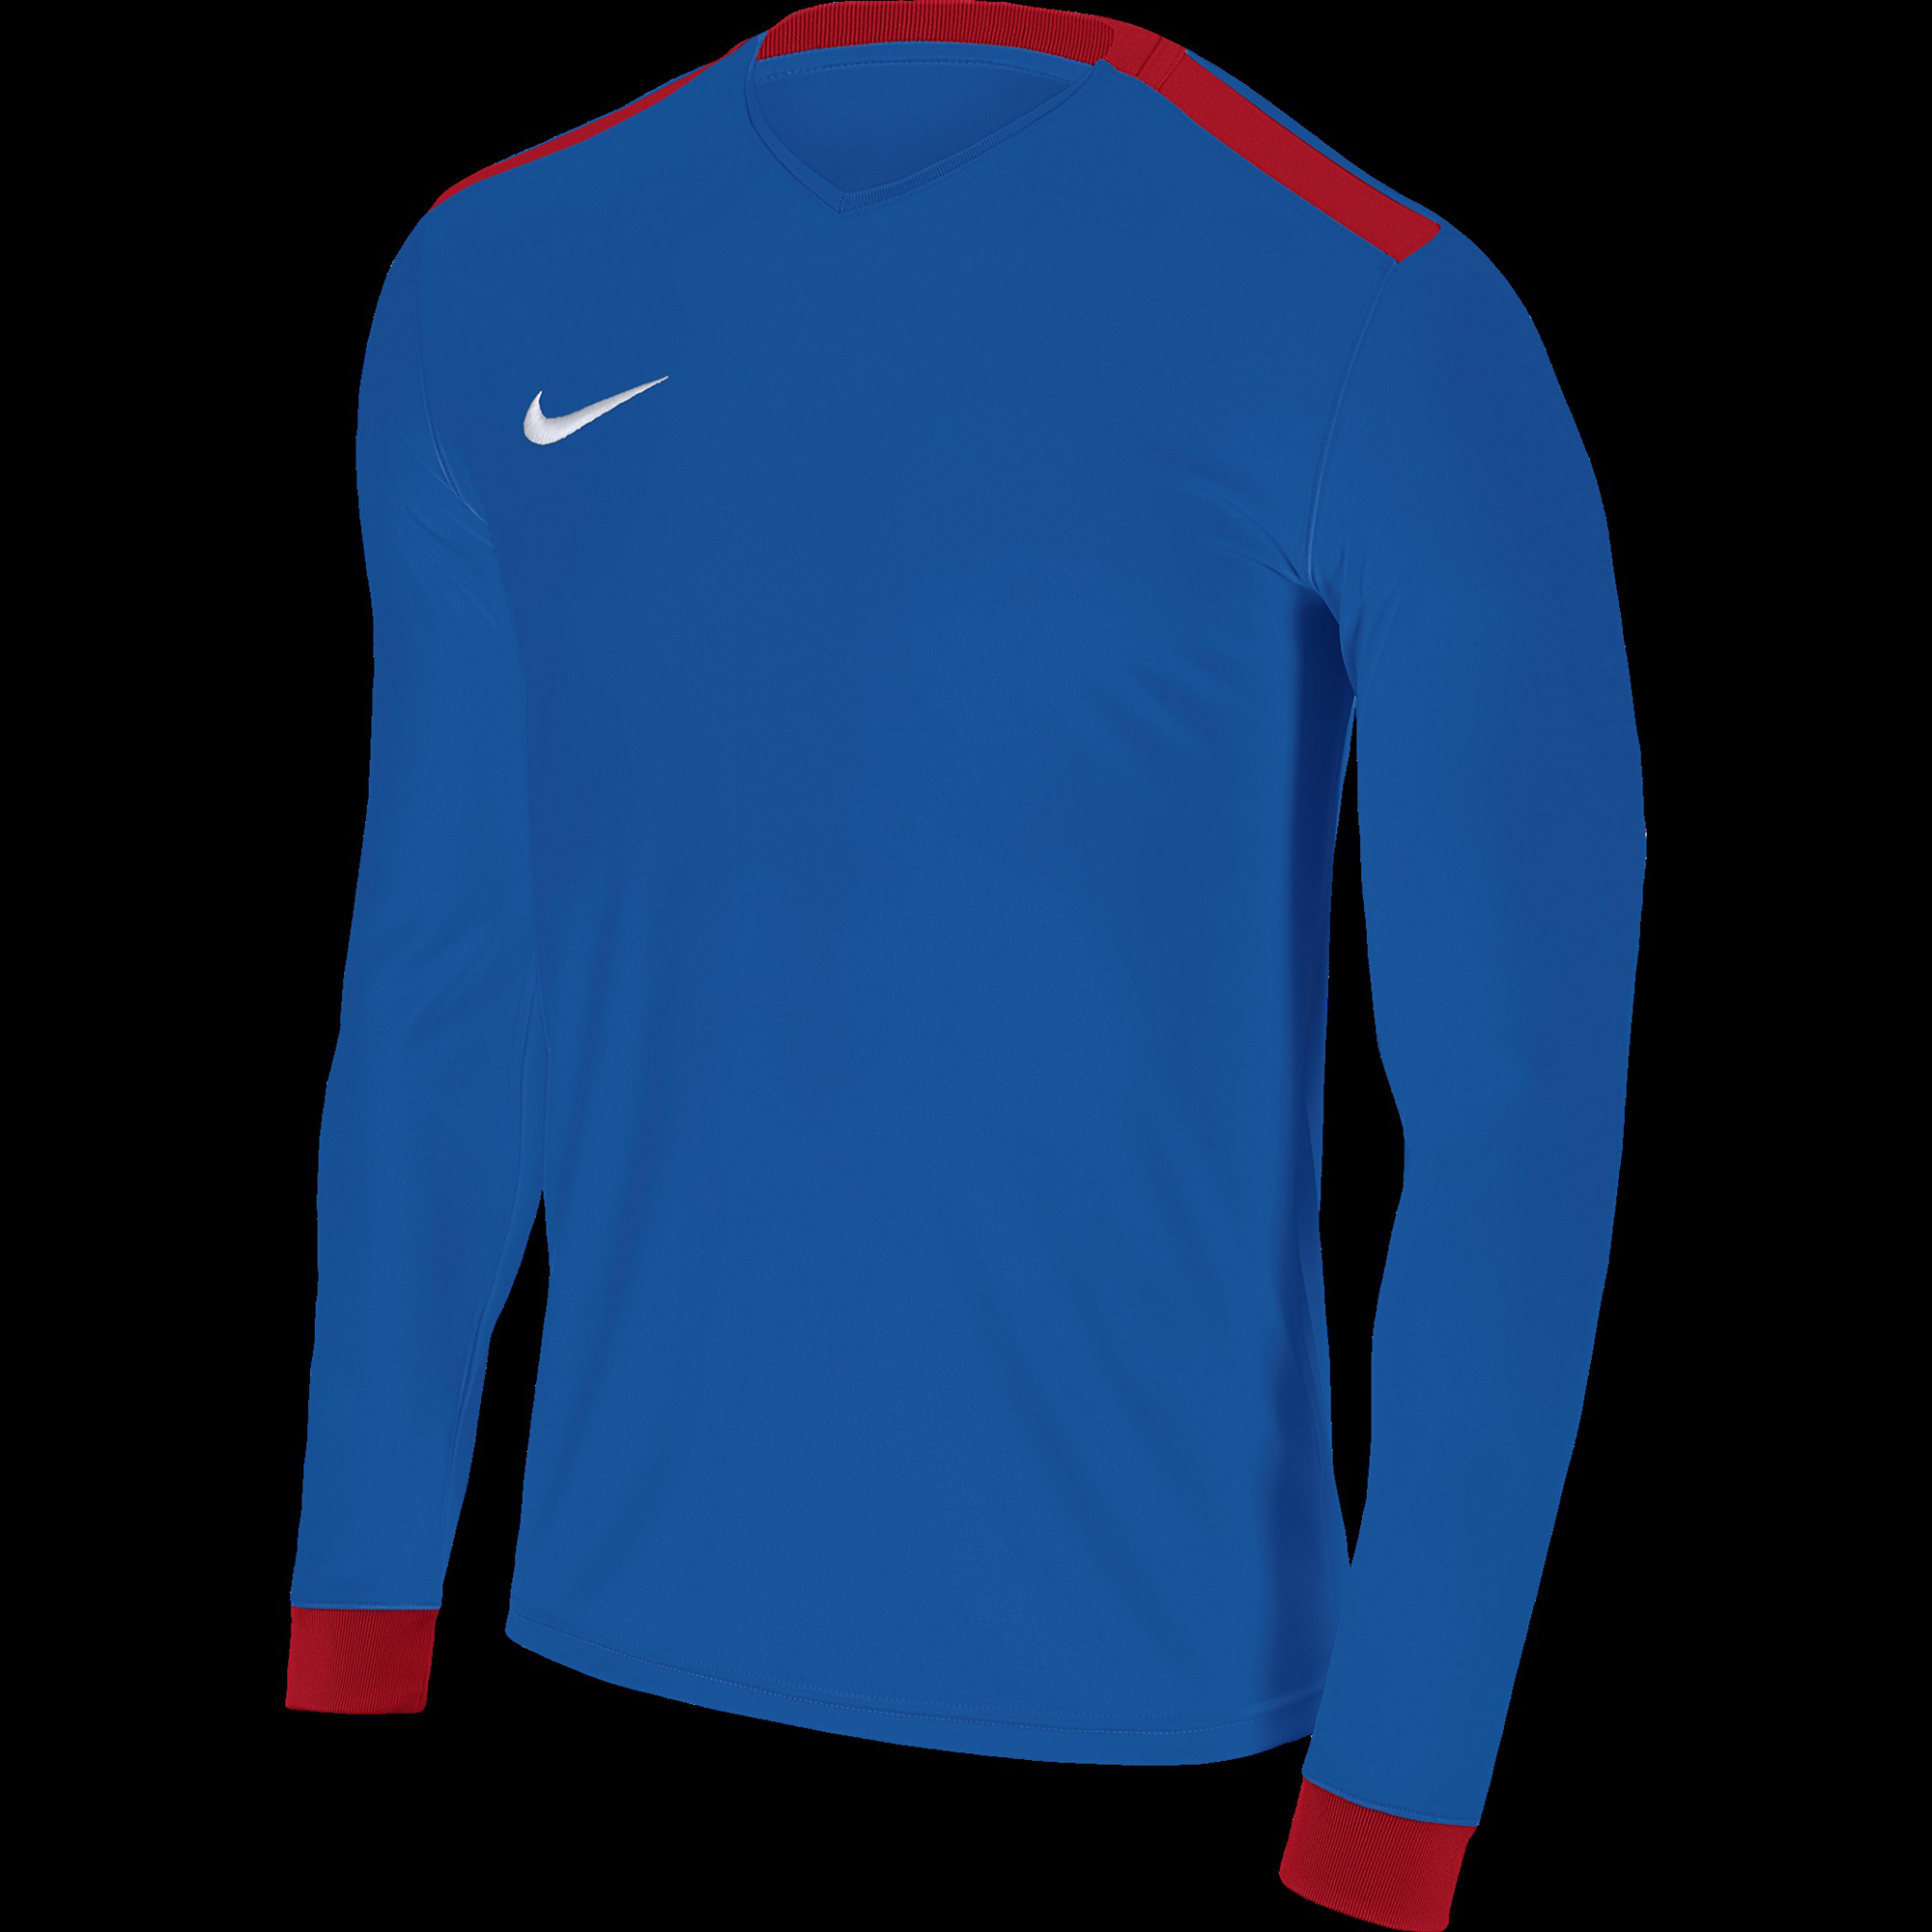 royal blue and red shirt